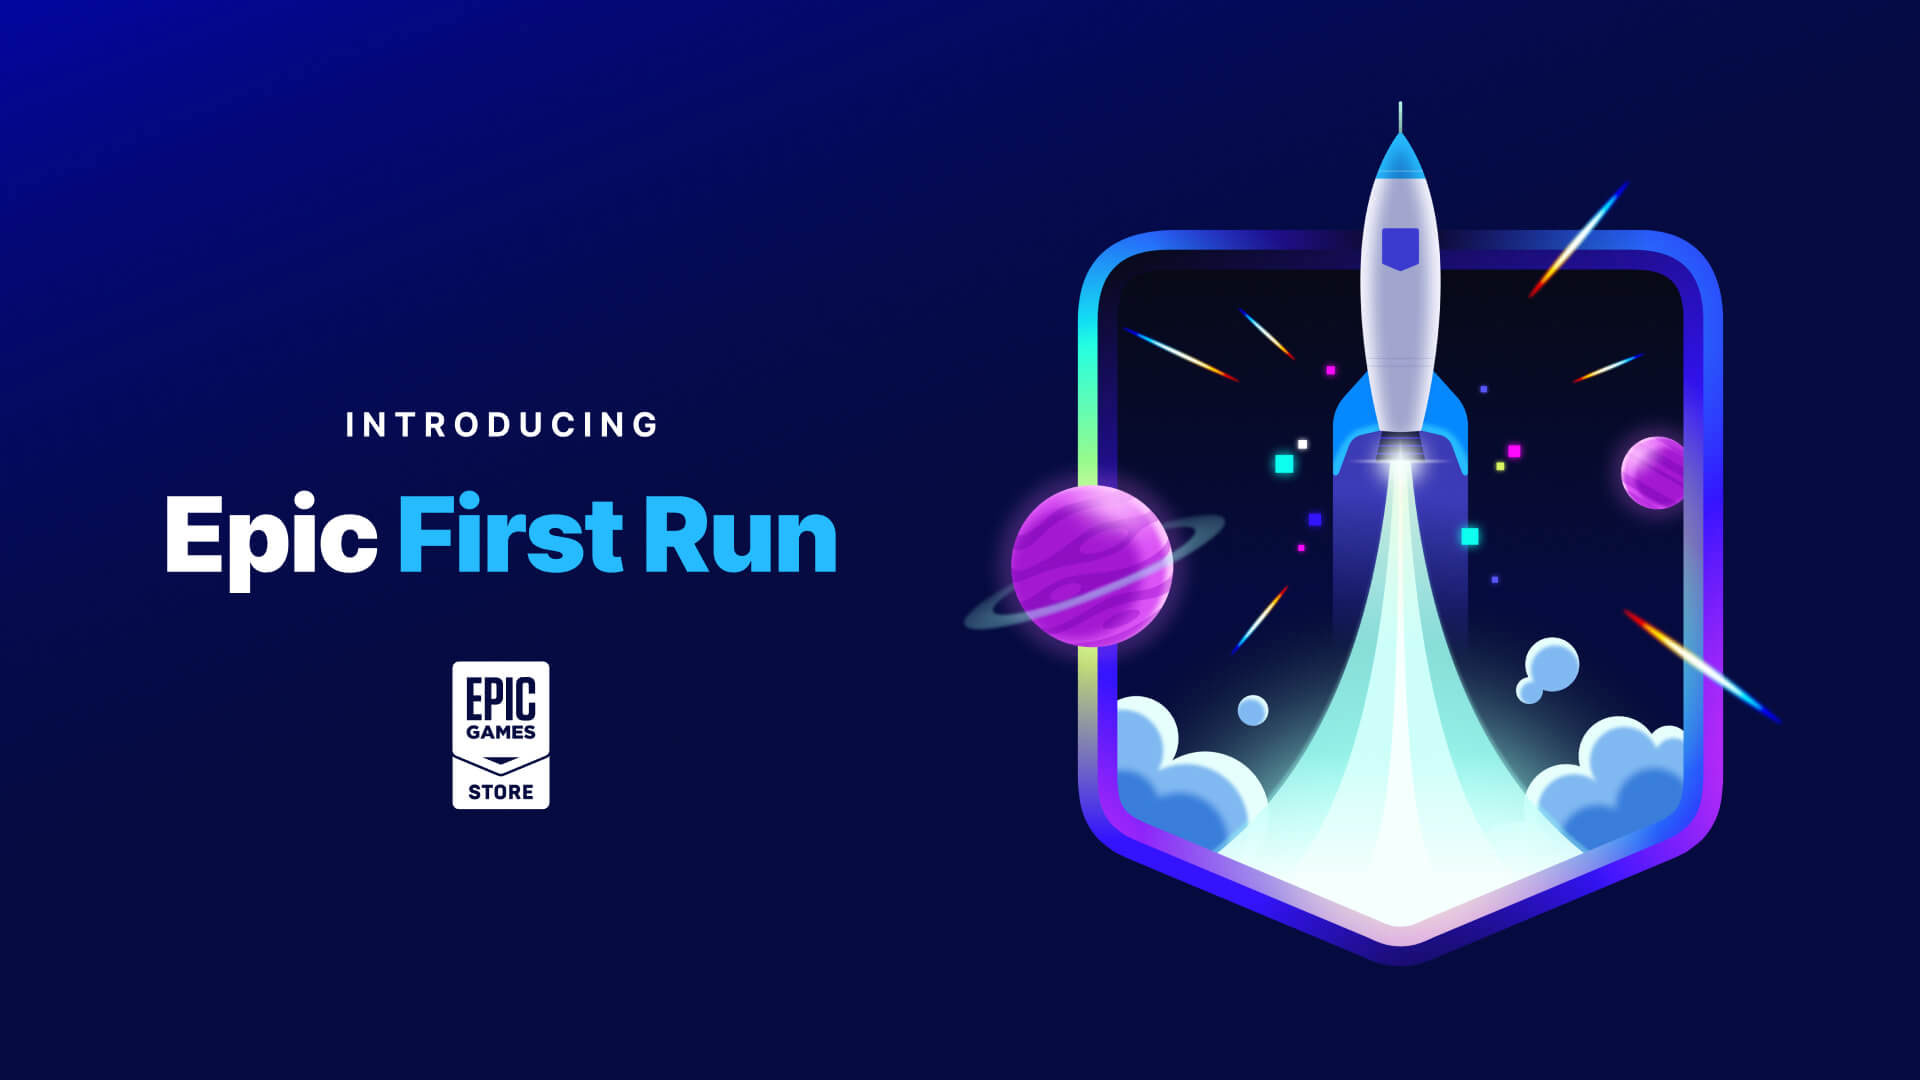 The Epic First Run program gives developers 100% of their revenue for the first six months on the Epic Games Store